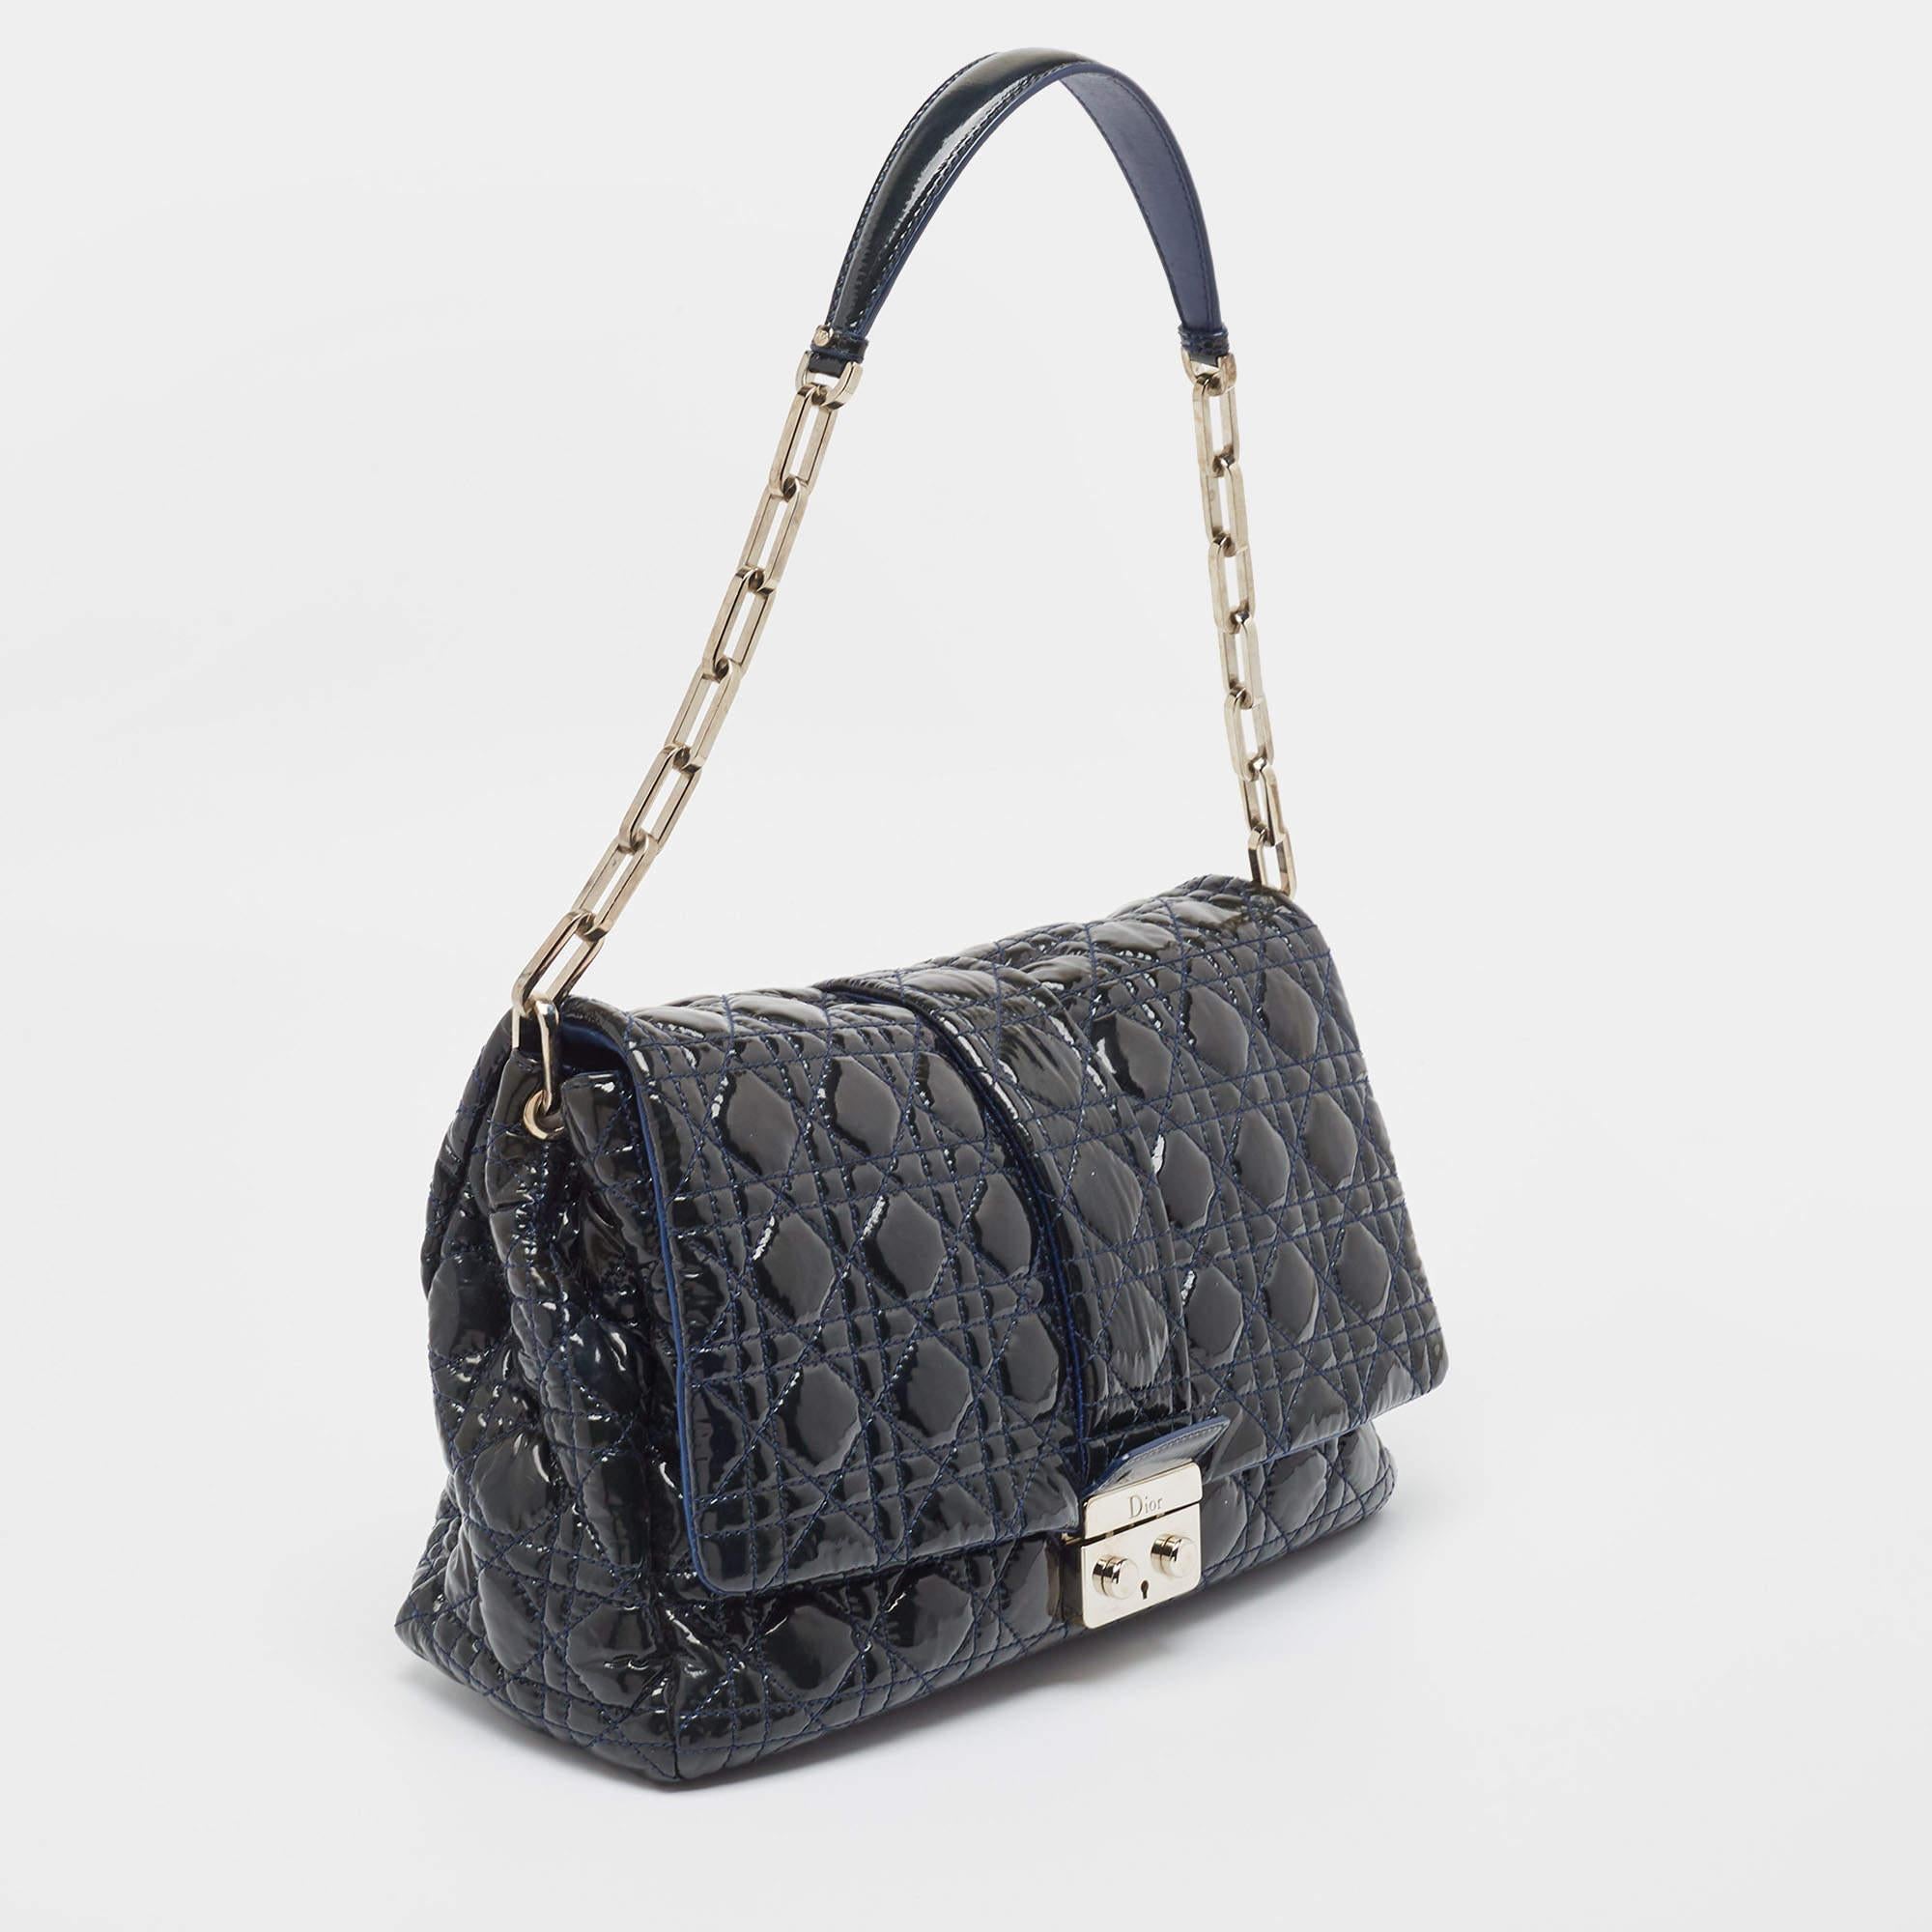 Dior Navy Blue Cannage Patent Leather Miss Dior Shoulder Bag In Good Condition For Sale In Dubai, Al Qouz 2